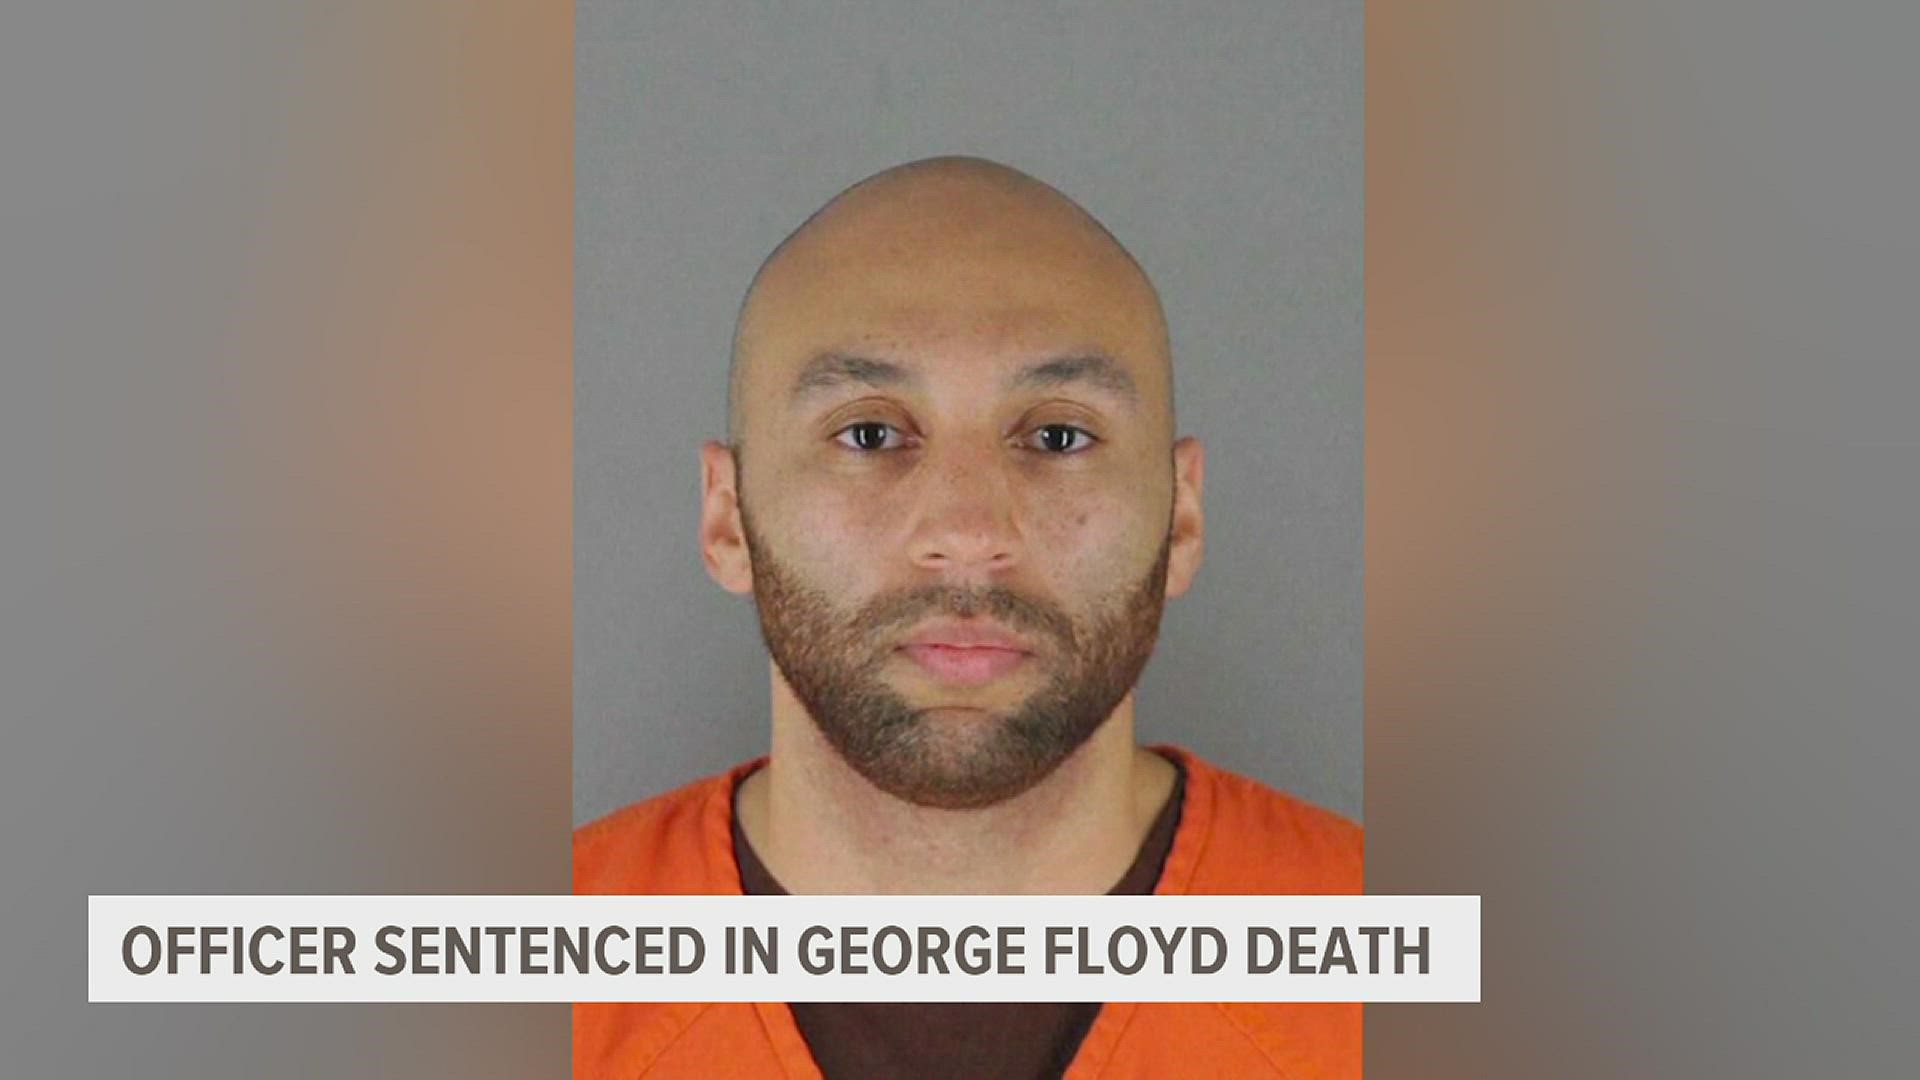 Alexander Keung was one of the officers involved in the death of George Floyd in May 2020, and he faces three years in prison for violations of civil rights.